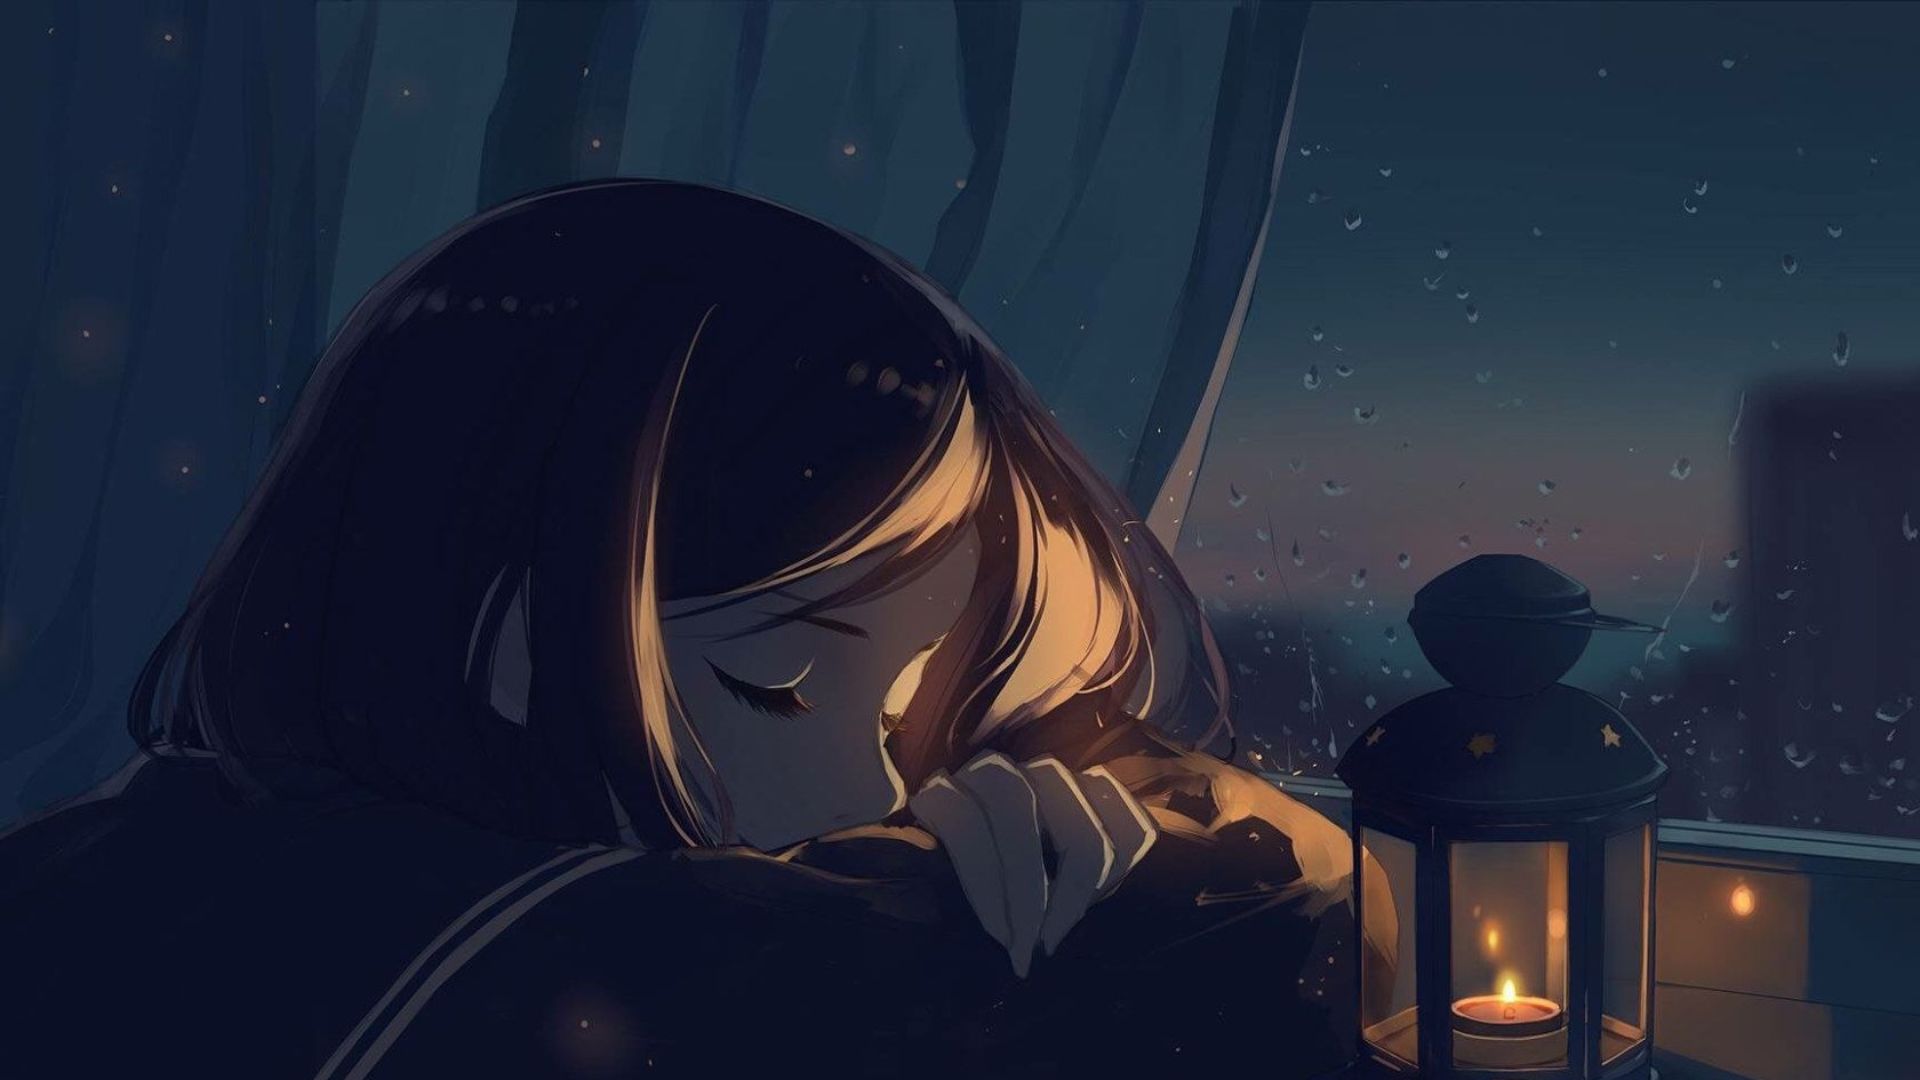 Sad Anime Wallpapers Top Best Sad Anime Backgrounds Download